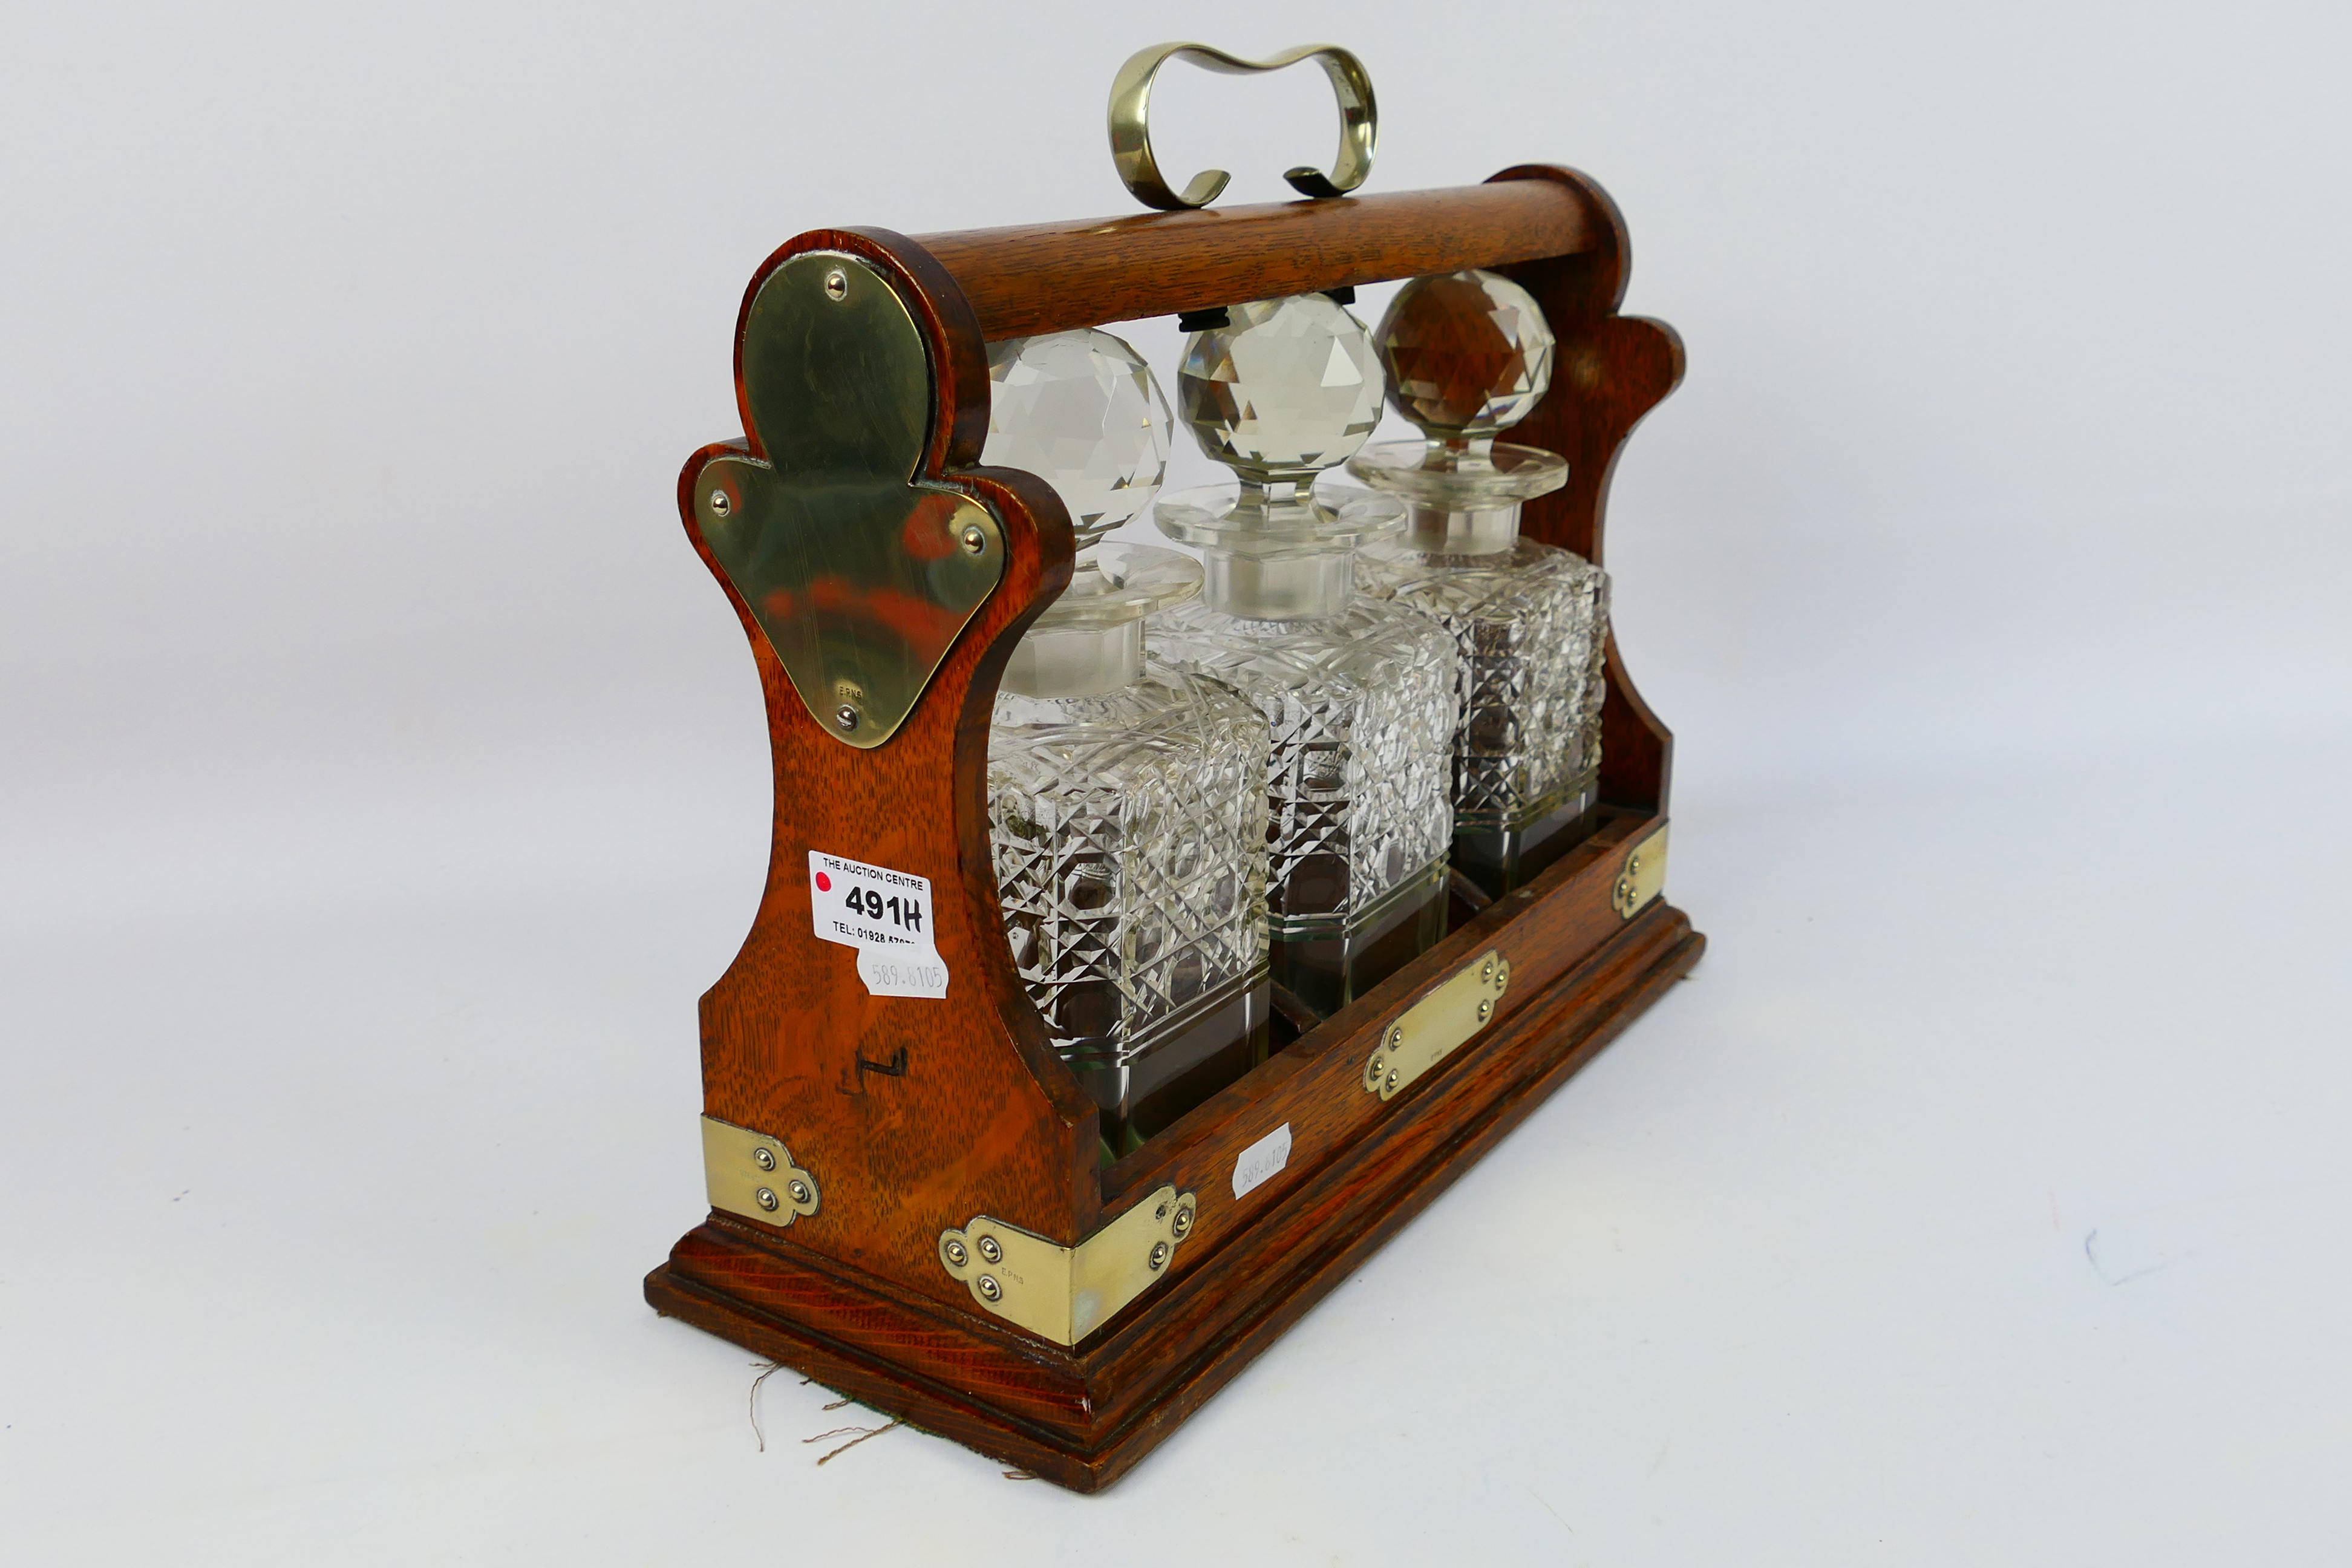 A three decanter oak tantalus with plated mounts, no maker's mark visible. - Image 4 of 6